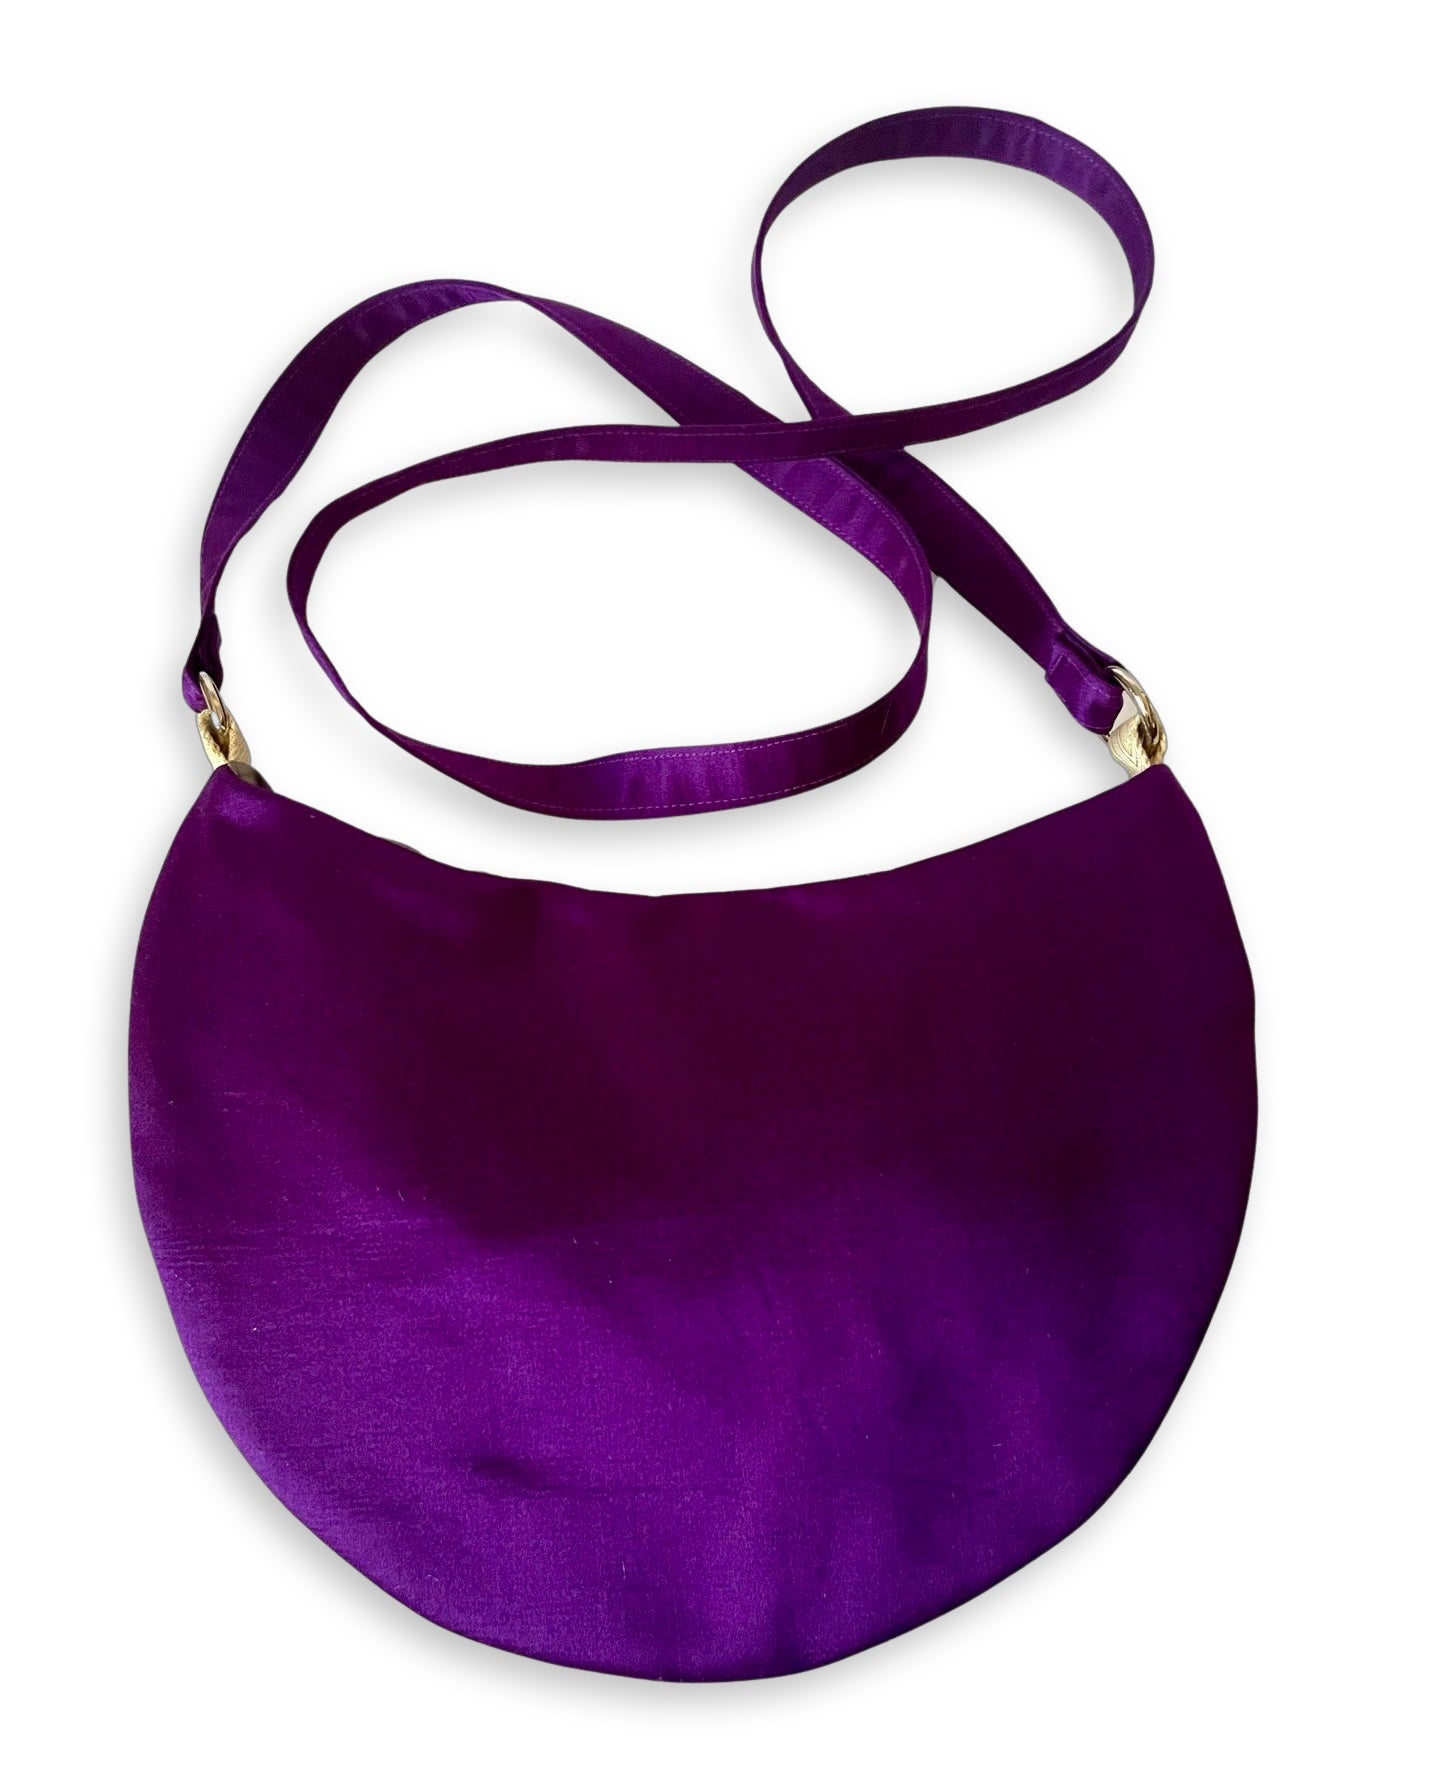 Purple with White Peony Crescent Bag